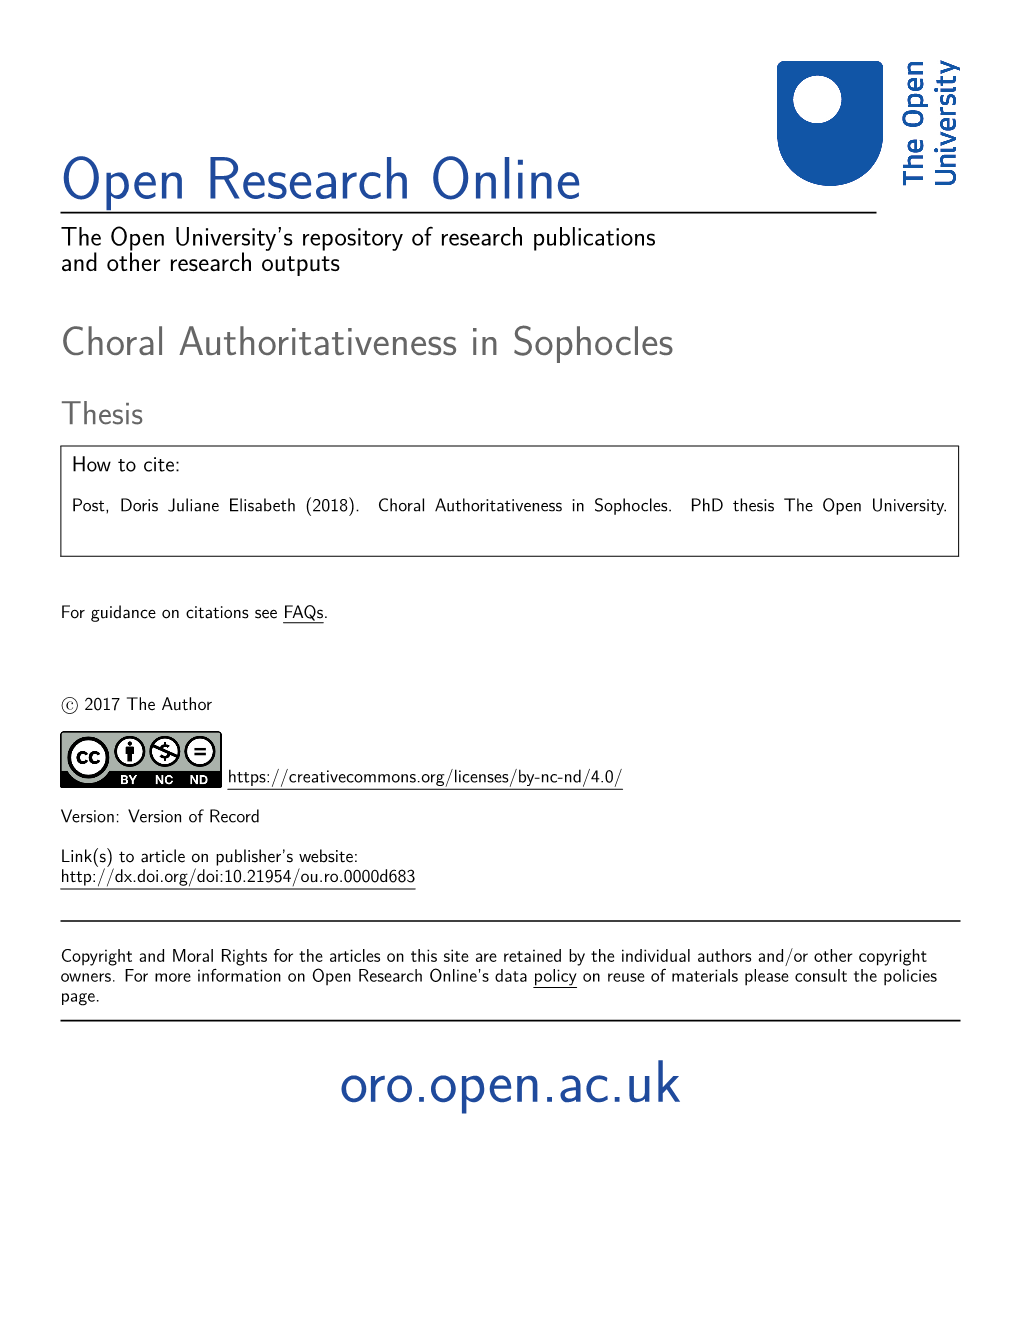 Choral Authoritativeness in Sophocles